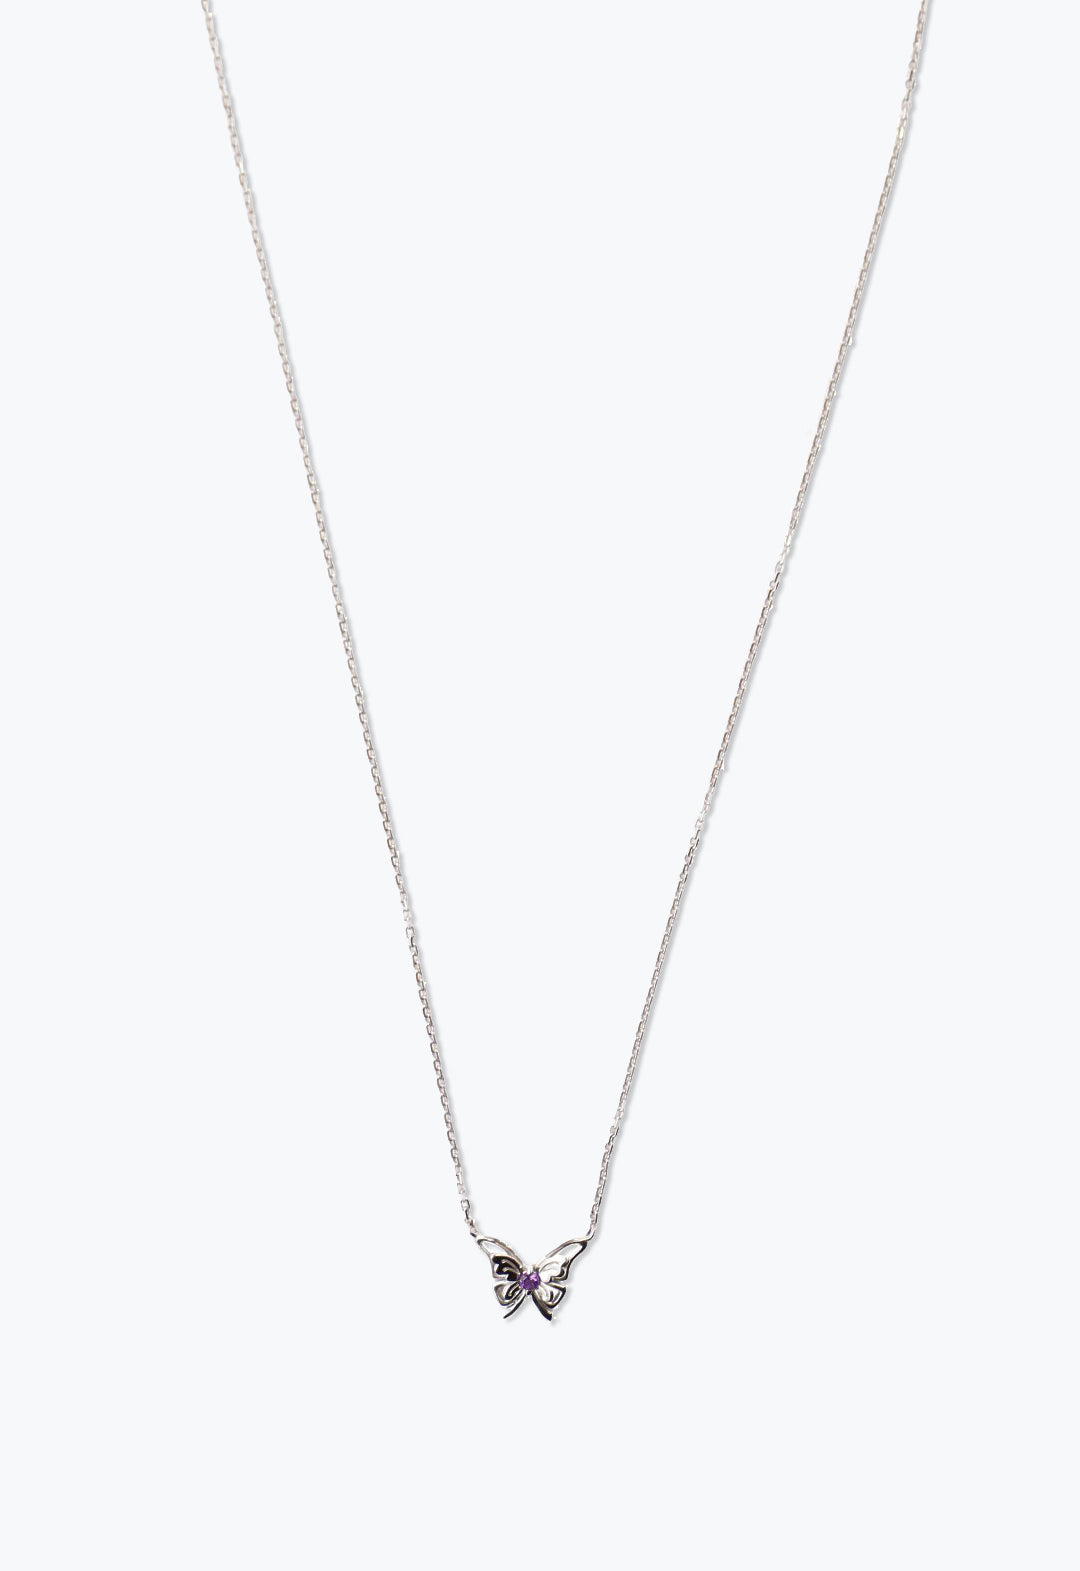 Ribbon Butterfly Necklace Silver is in Rhodium Plated metal, an. Amethyst is at butterfly center